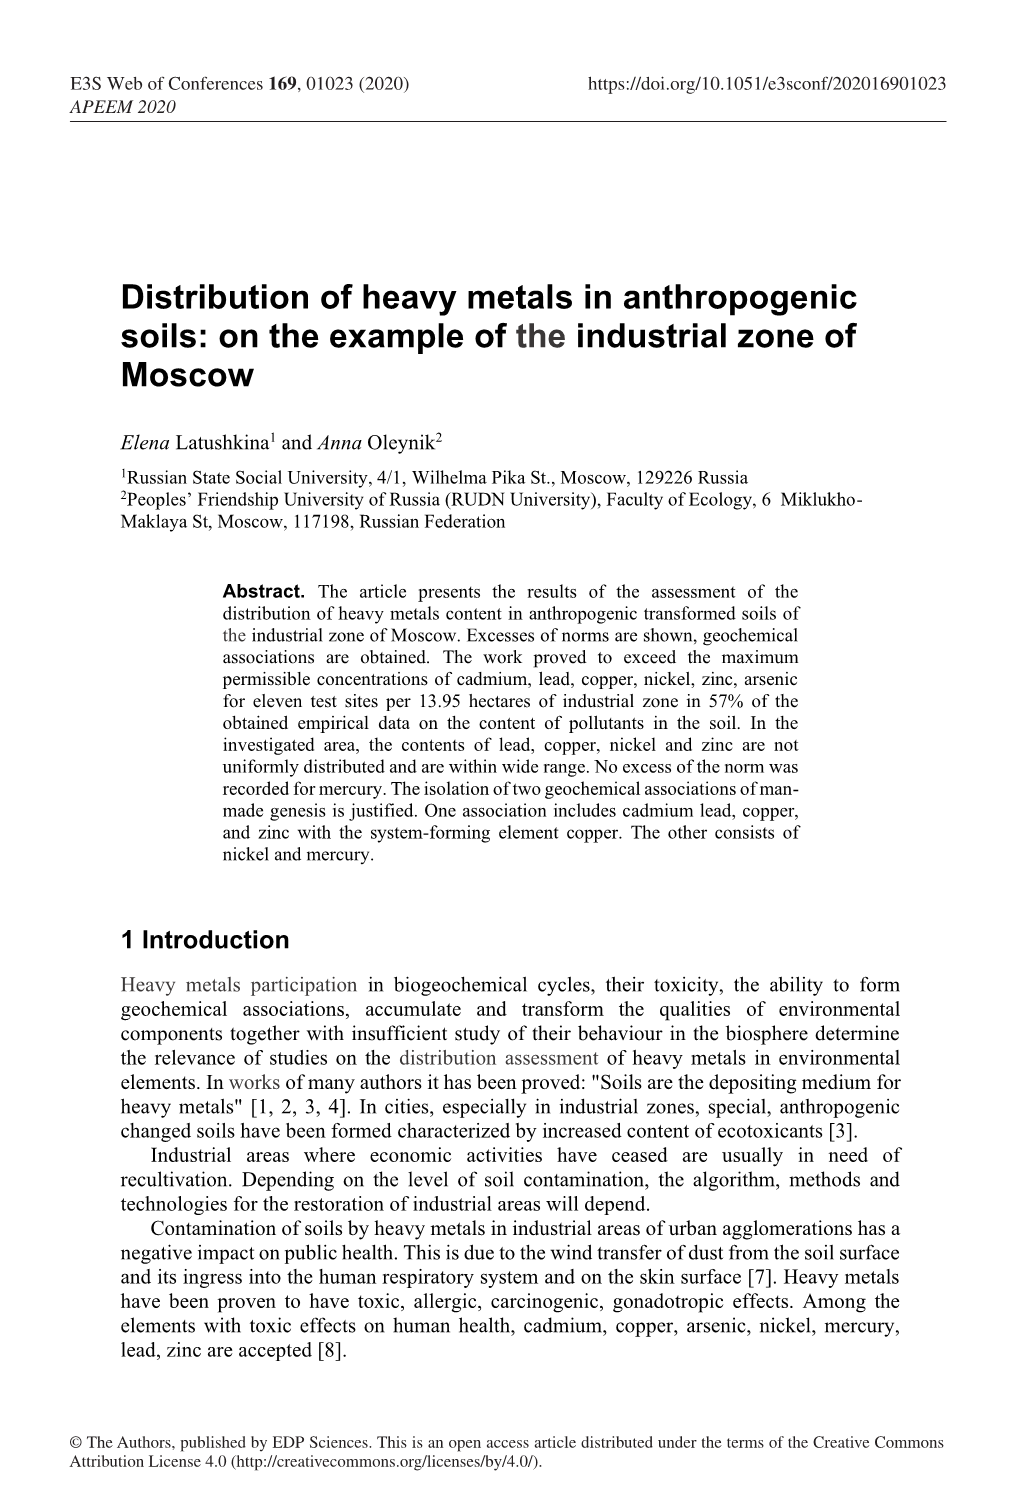 Distribution of Heavy Metals in Anthropogenic Soils: on the Example of the Industrial Zone of Moscow